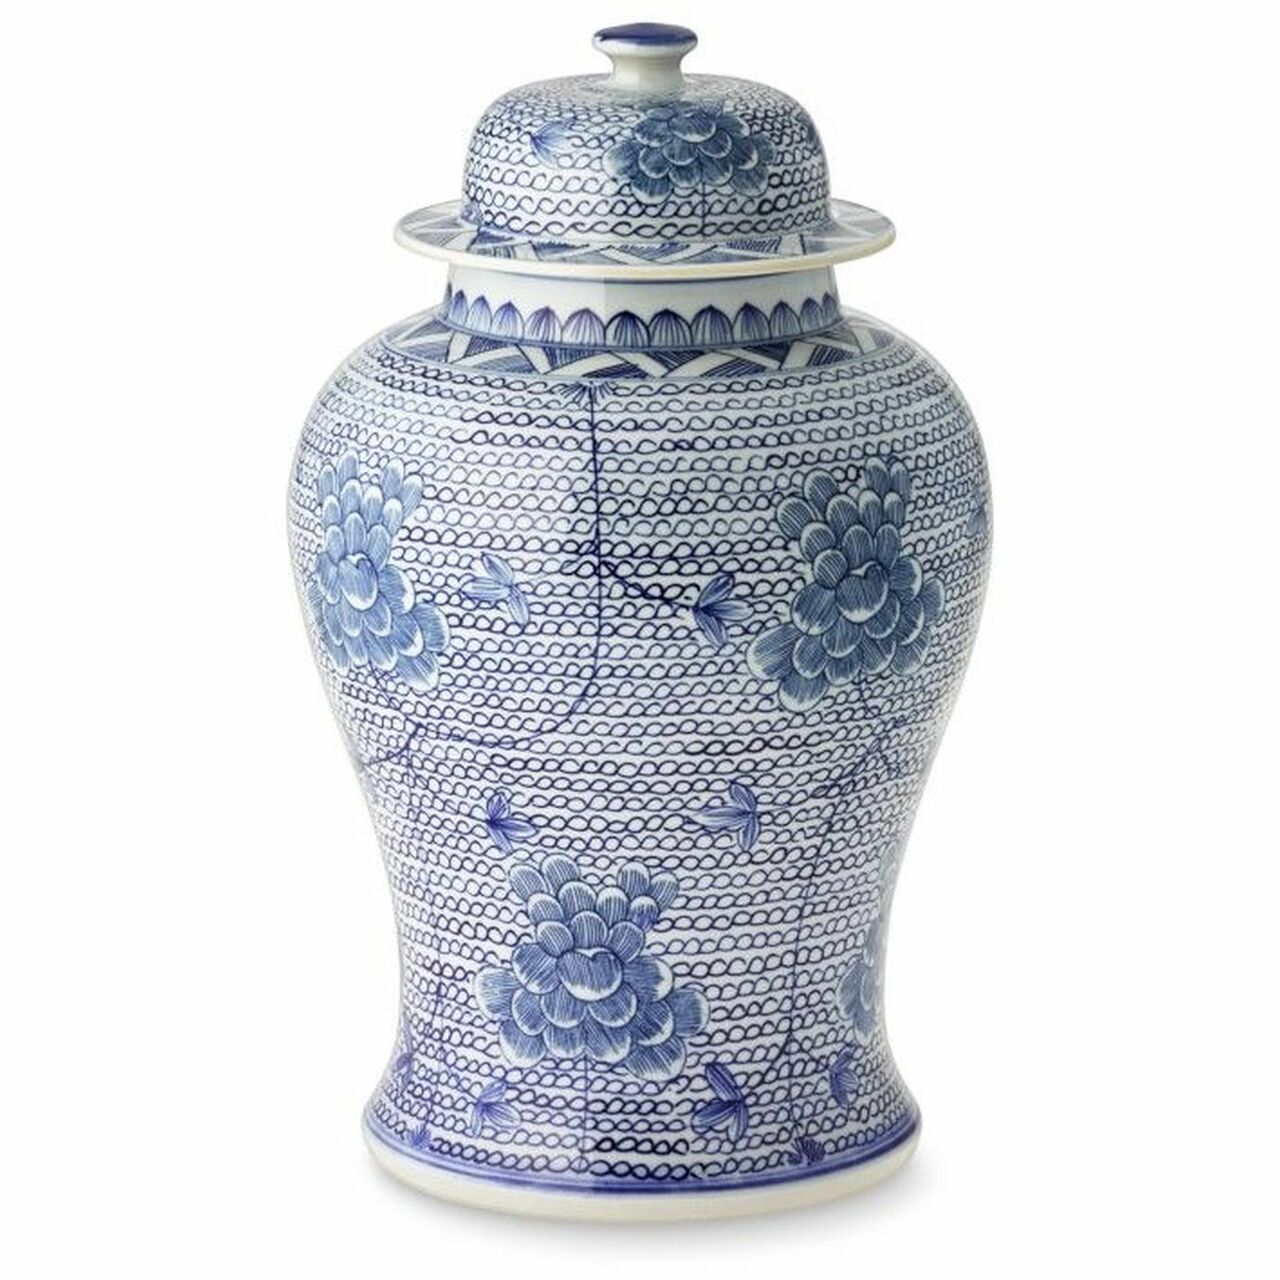 Roses & Chains Temple Jar - 2 Sizes